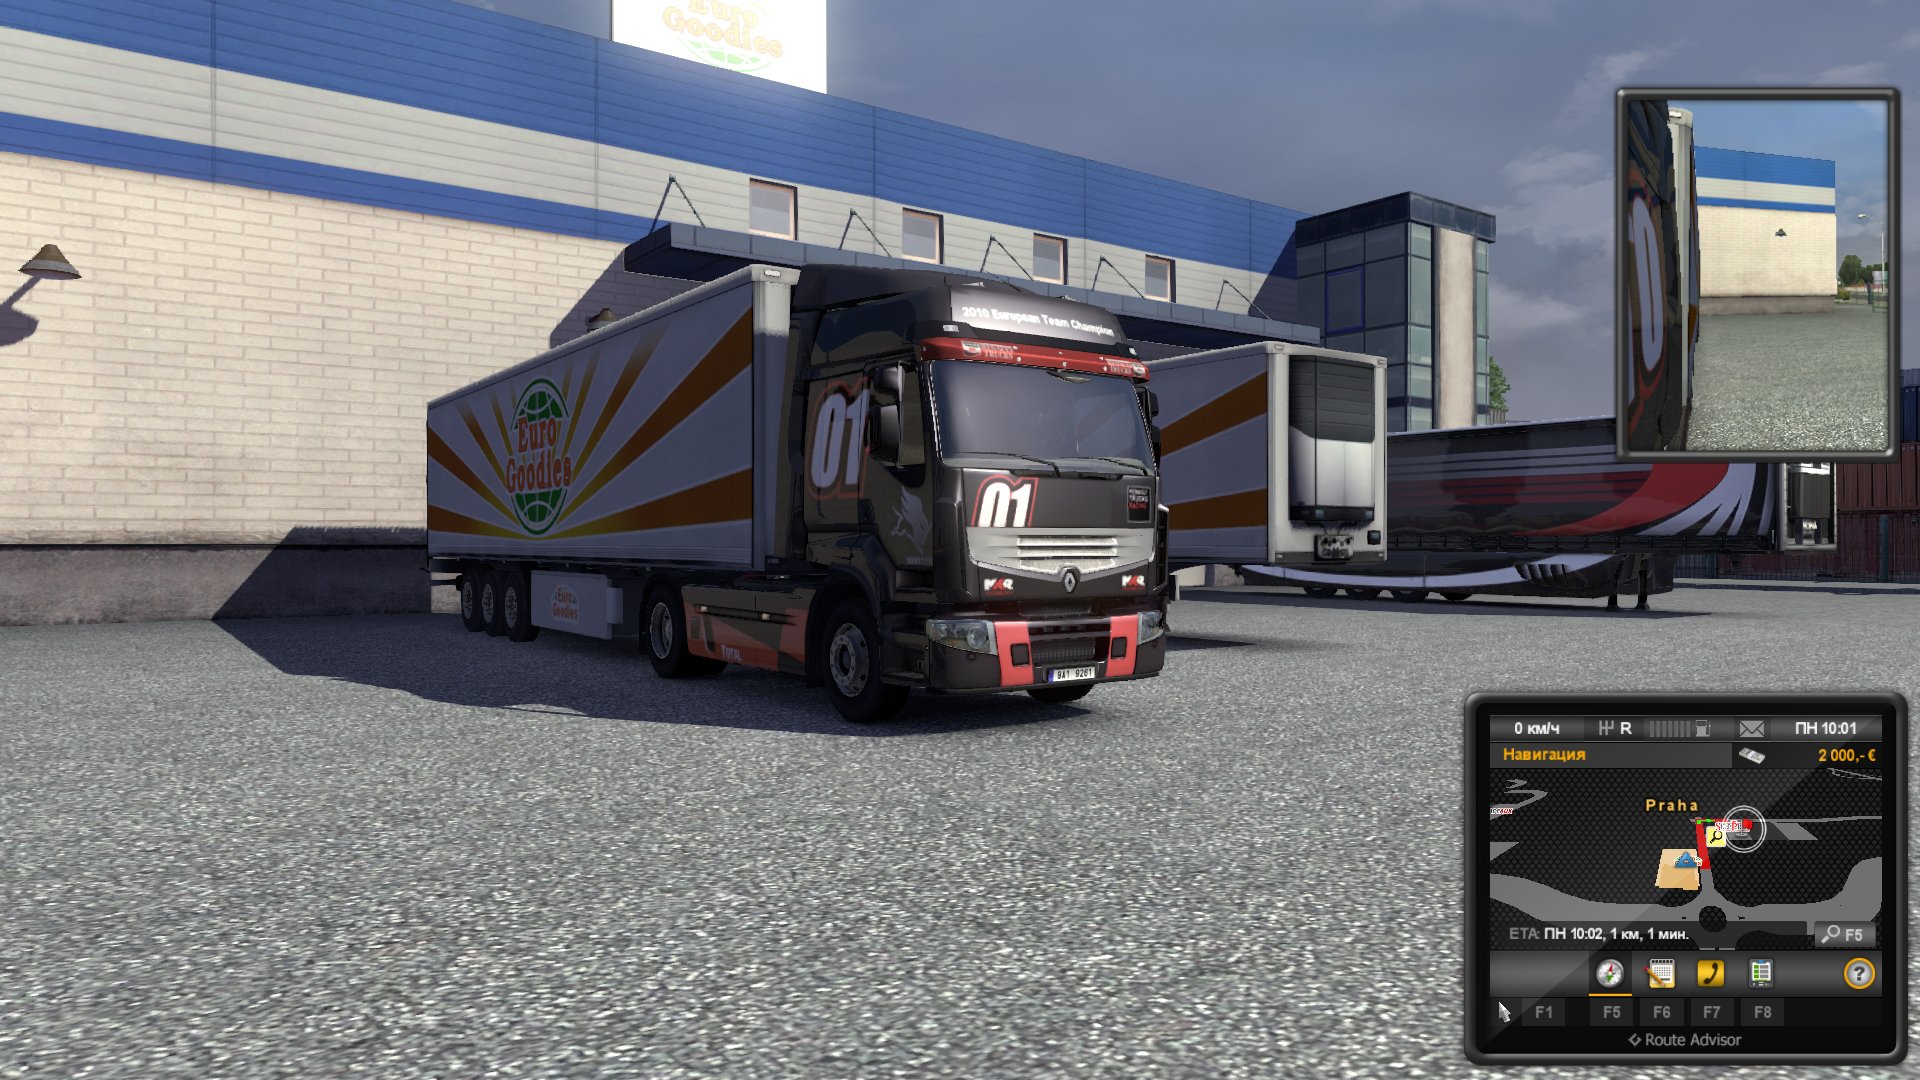 Download free euro truck simulator 2 iso torent utorrent download movies for free 2013